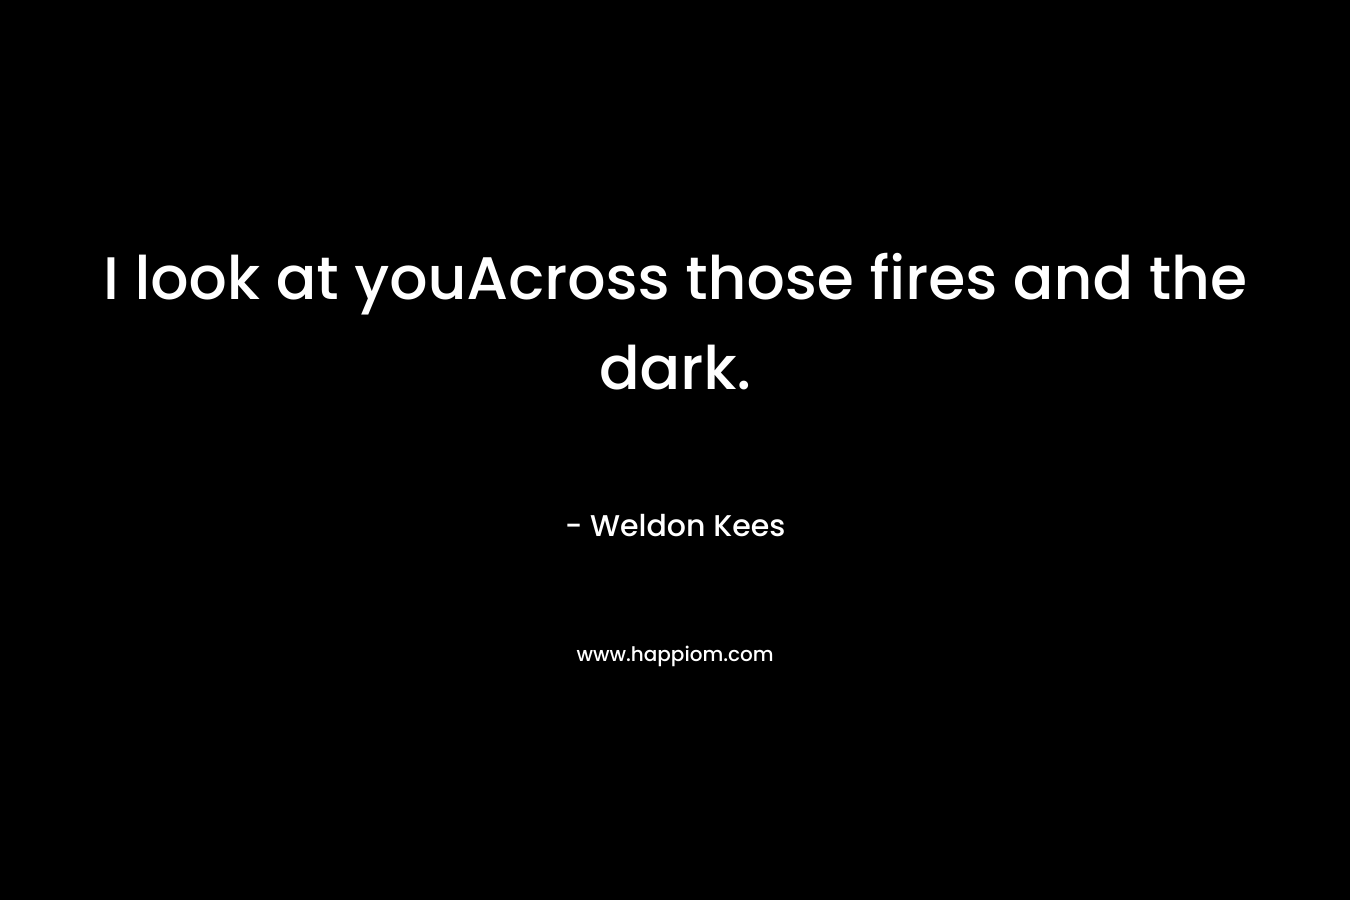 I look at youAcross those fires and the dark. – Weldon Kees